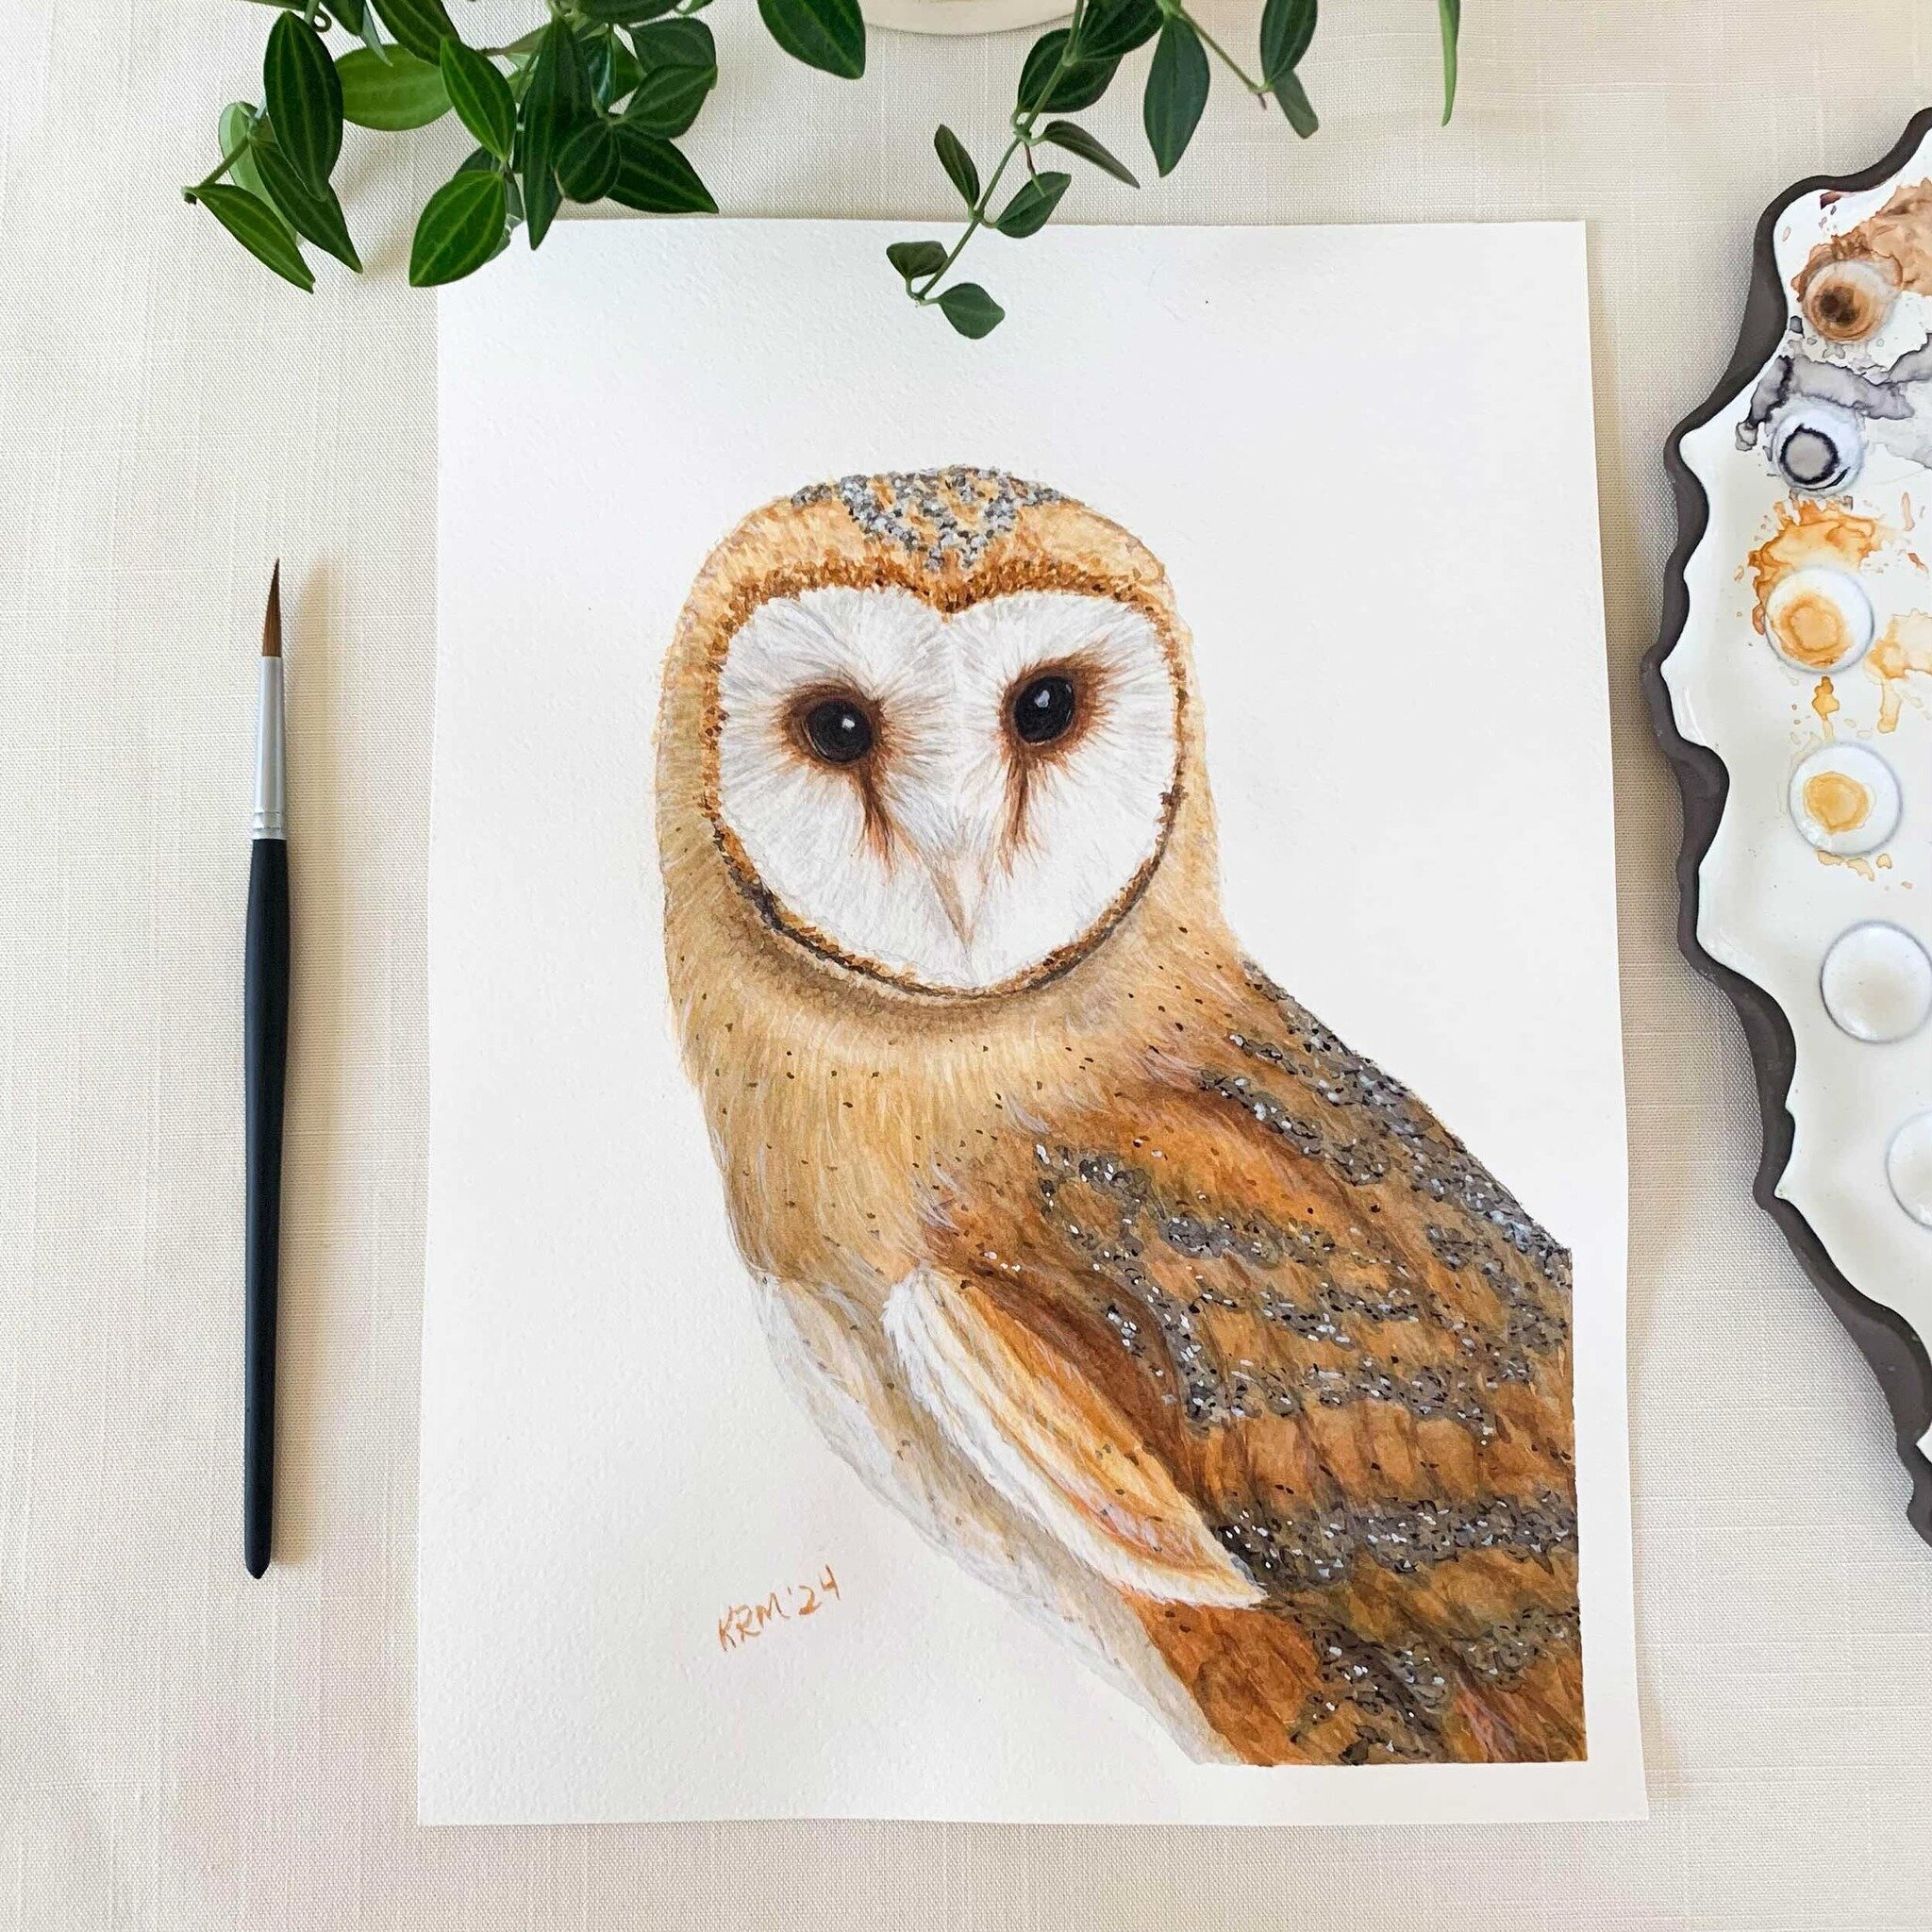 Barn Owl watercolor. 9 x 12 with white gouache. Prints available as well.
#barnowl #owllovers #owlpainting #owlsofinstagram #birdlovers #watercolorpainting #watercolorillustration #painting #naturelovers #inspiredbynature #willowglenstationery